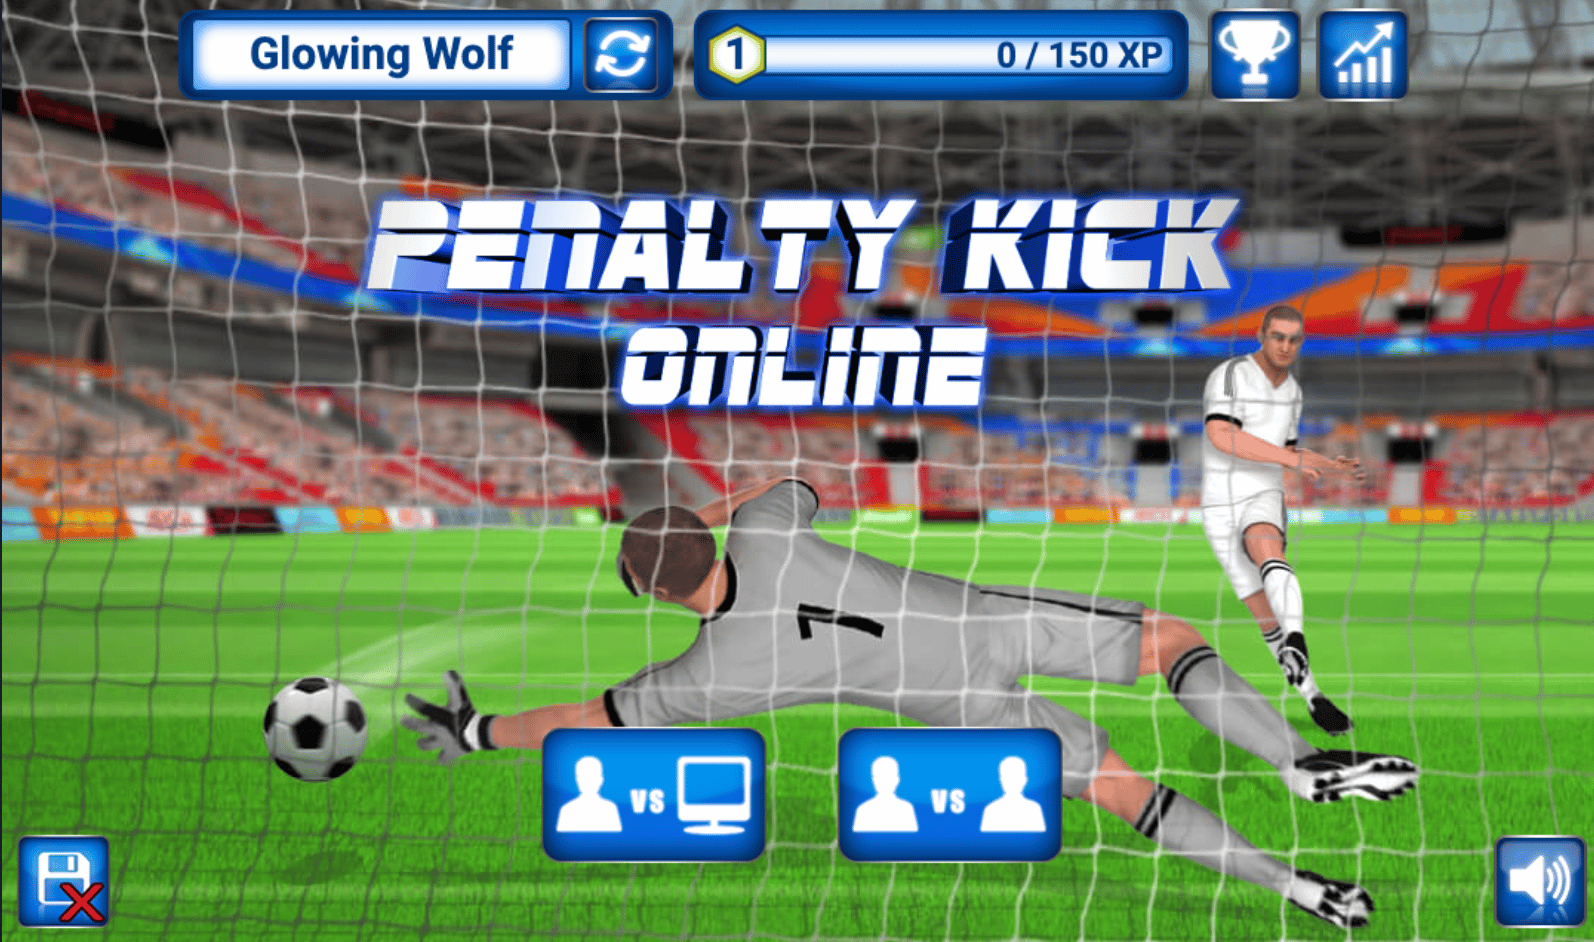 Image of Penalty kick online a 2 player game unlocked